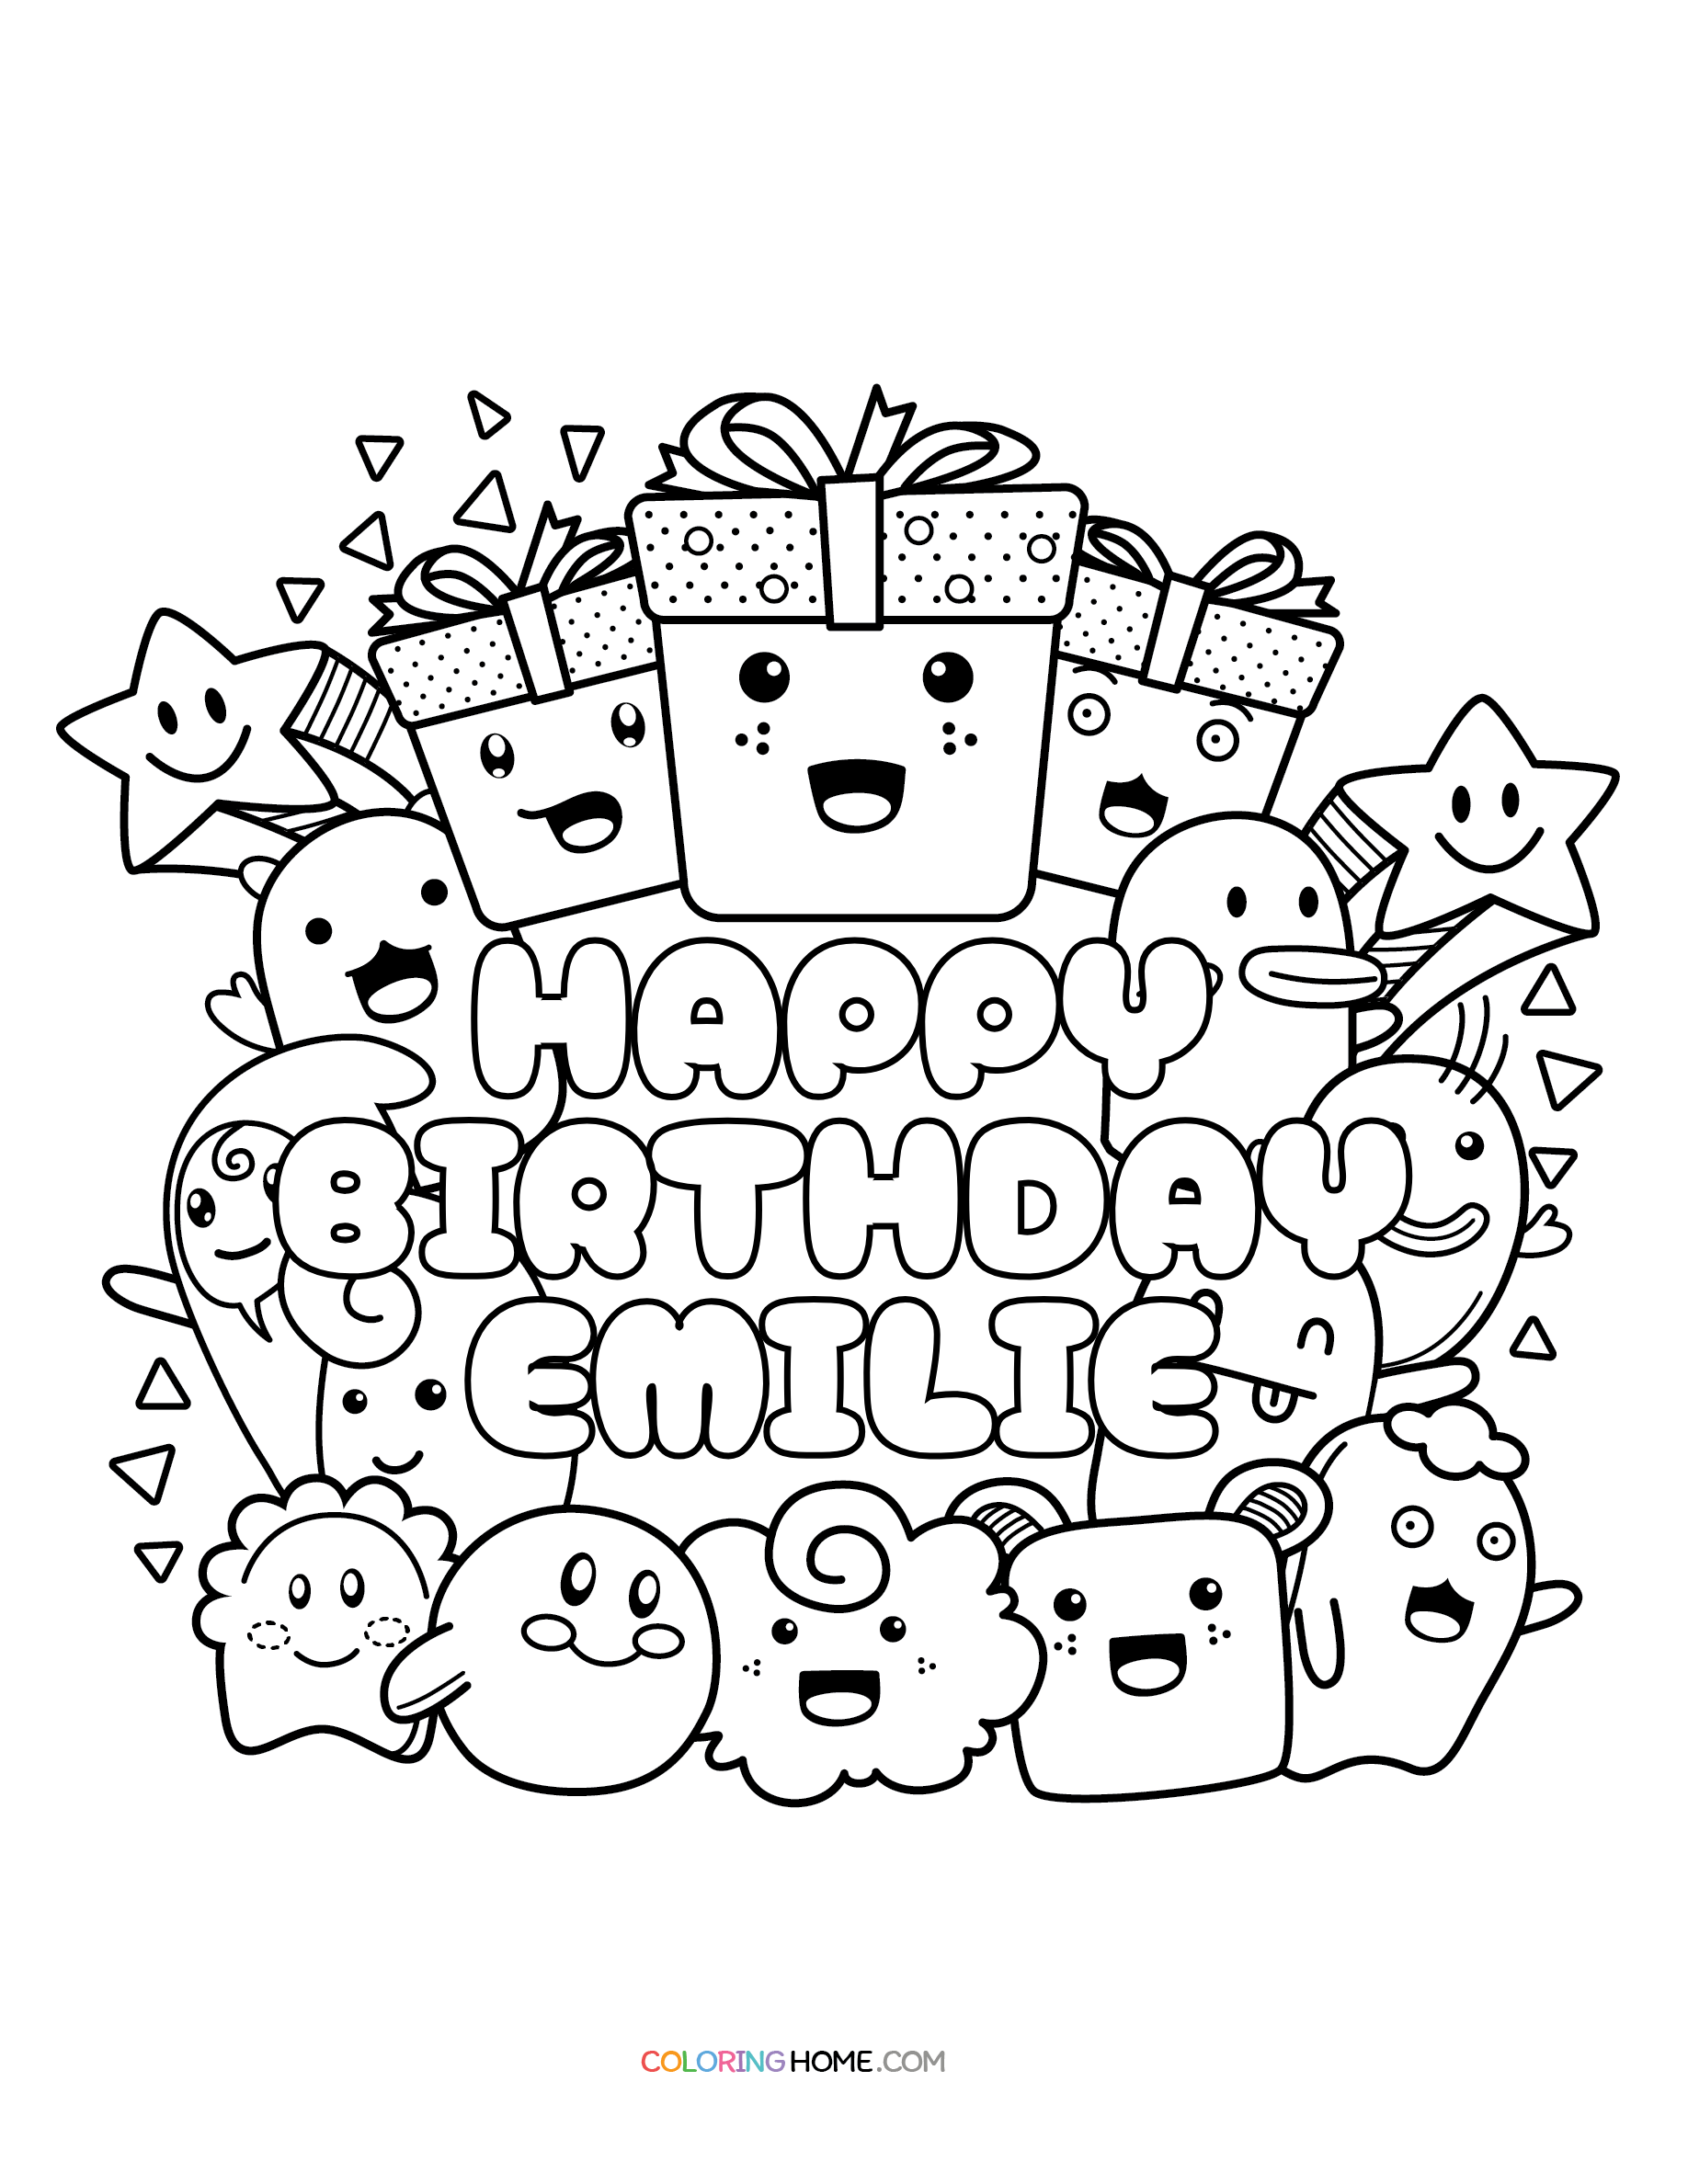 Happy Birthday Emilie coloring page